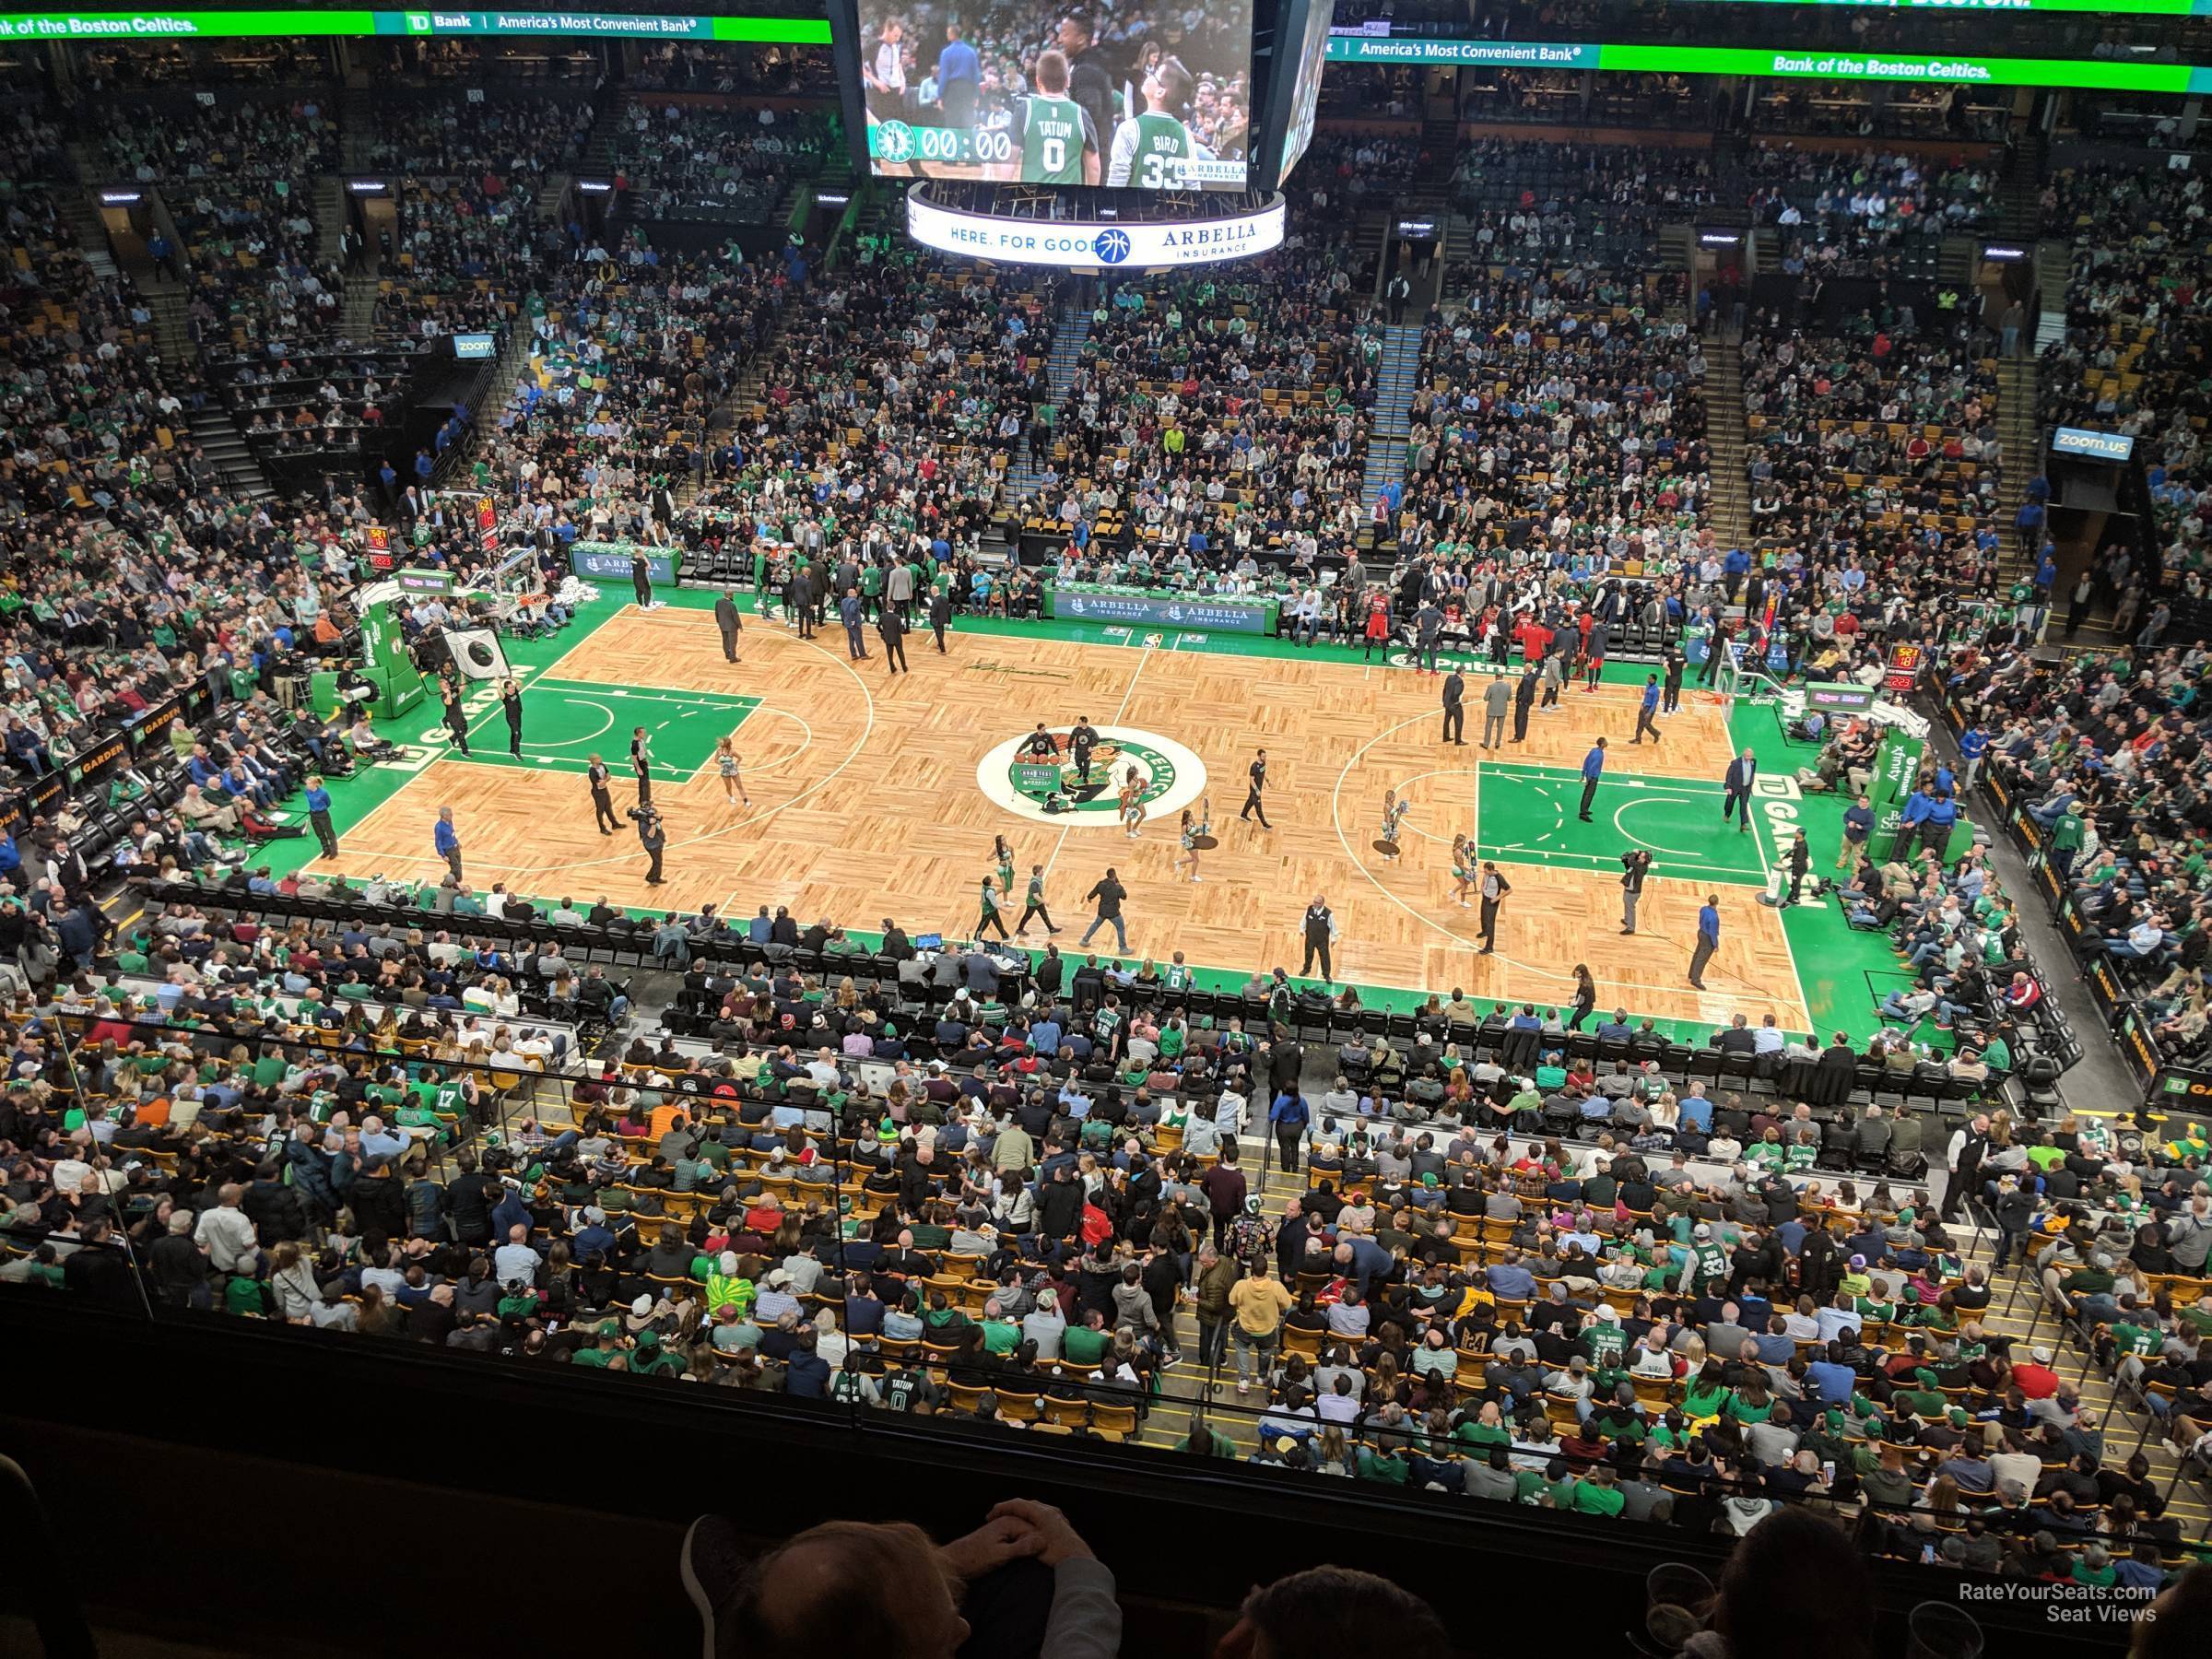 section 315, row 3 seat view  for basketball - td garden